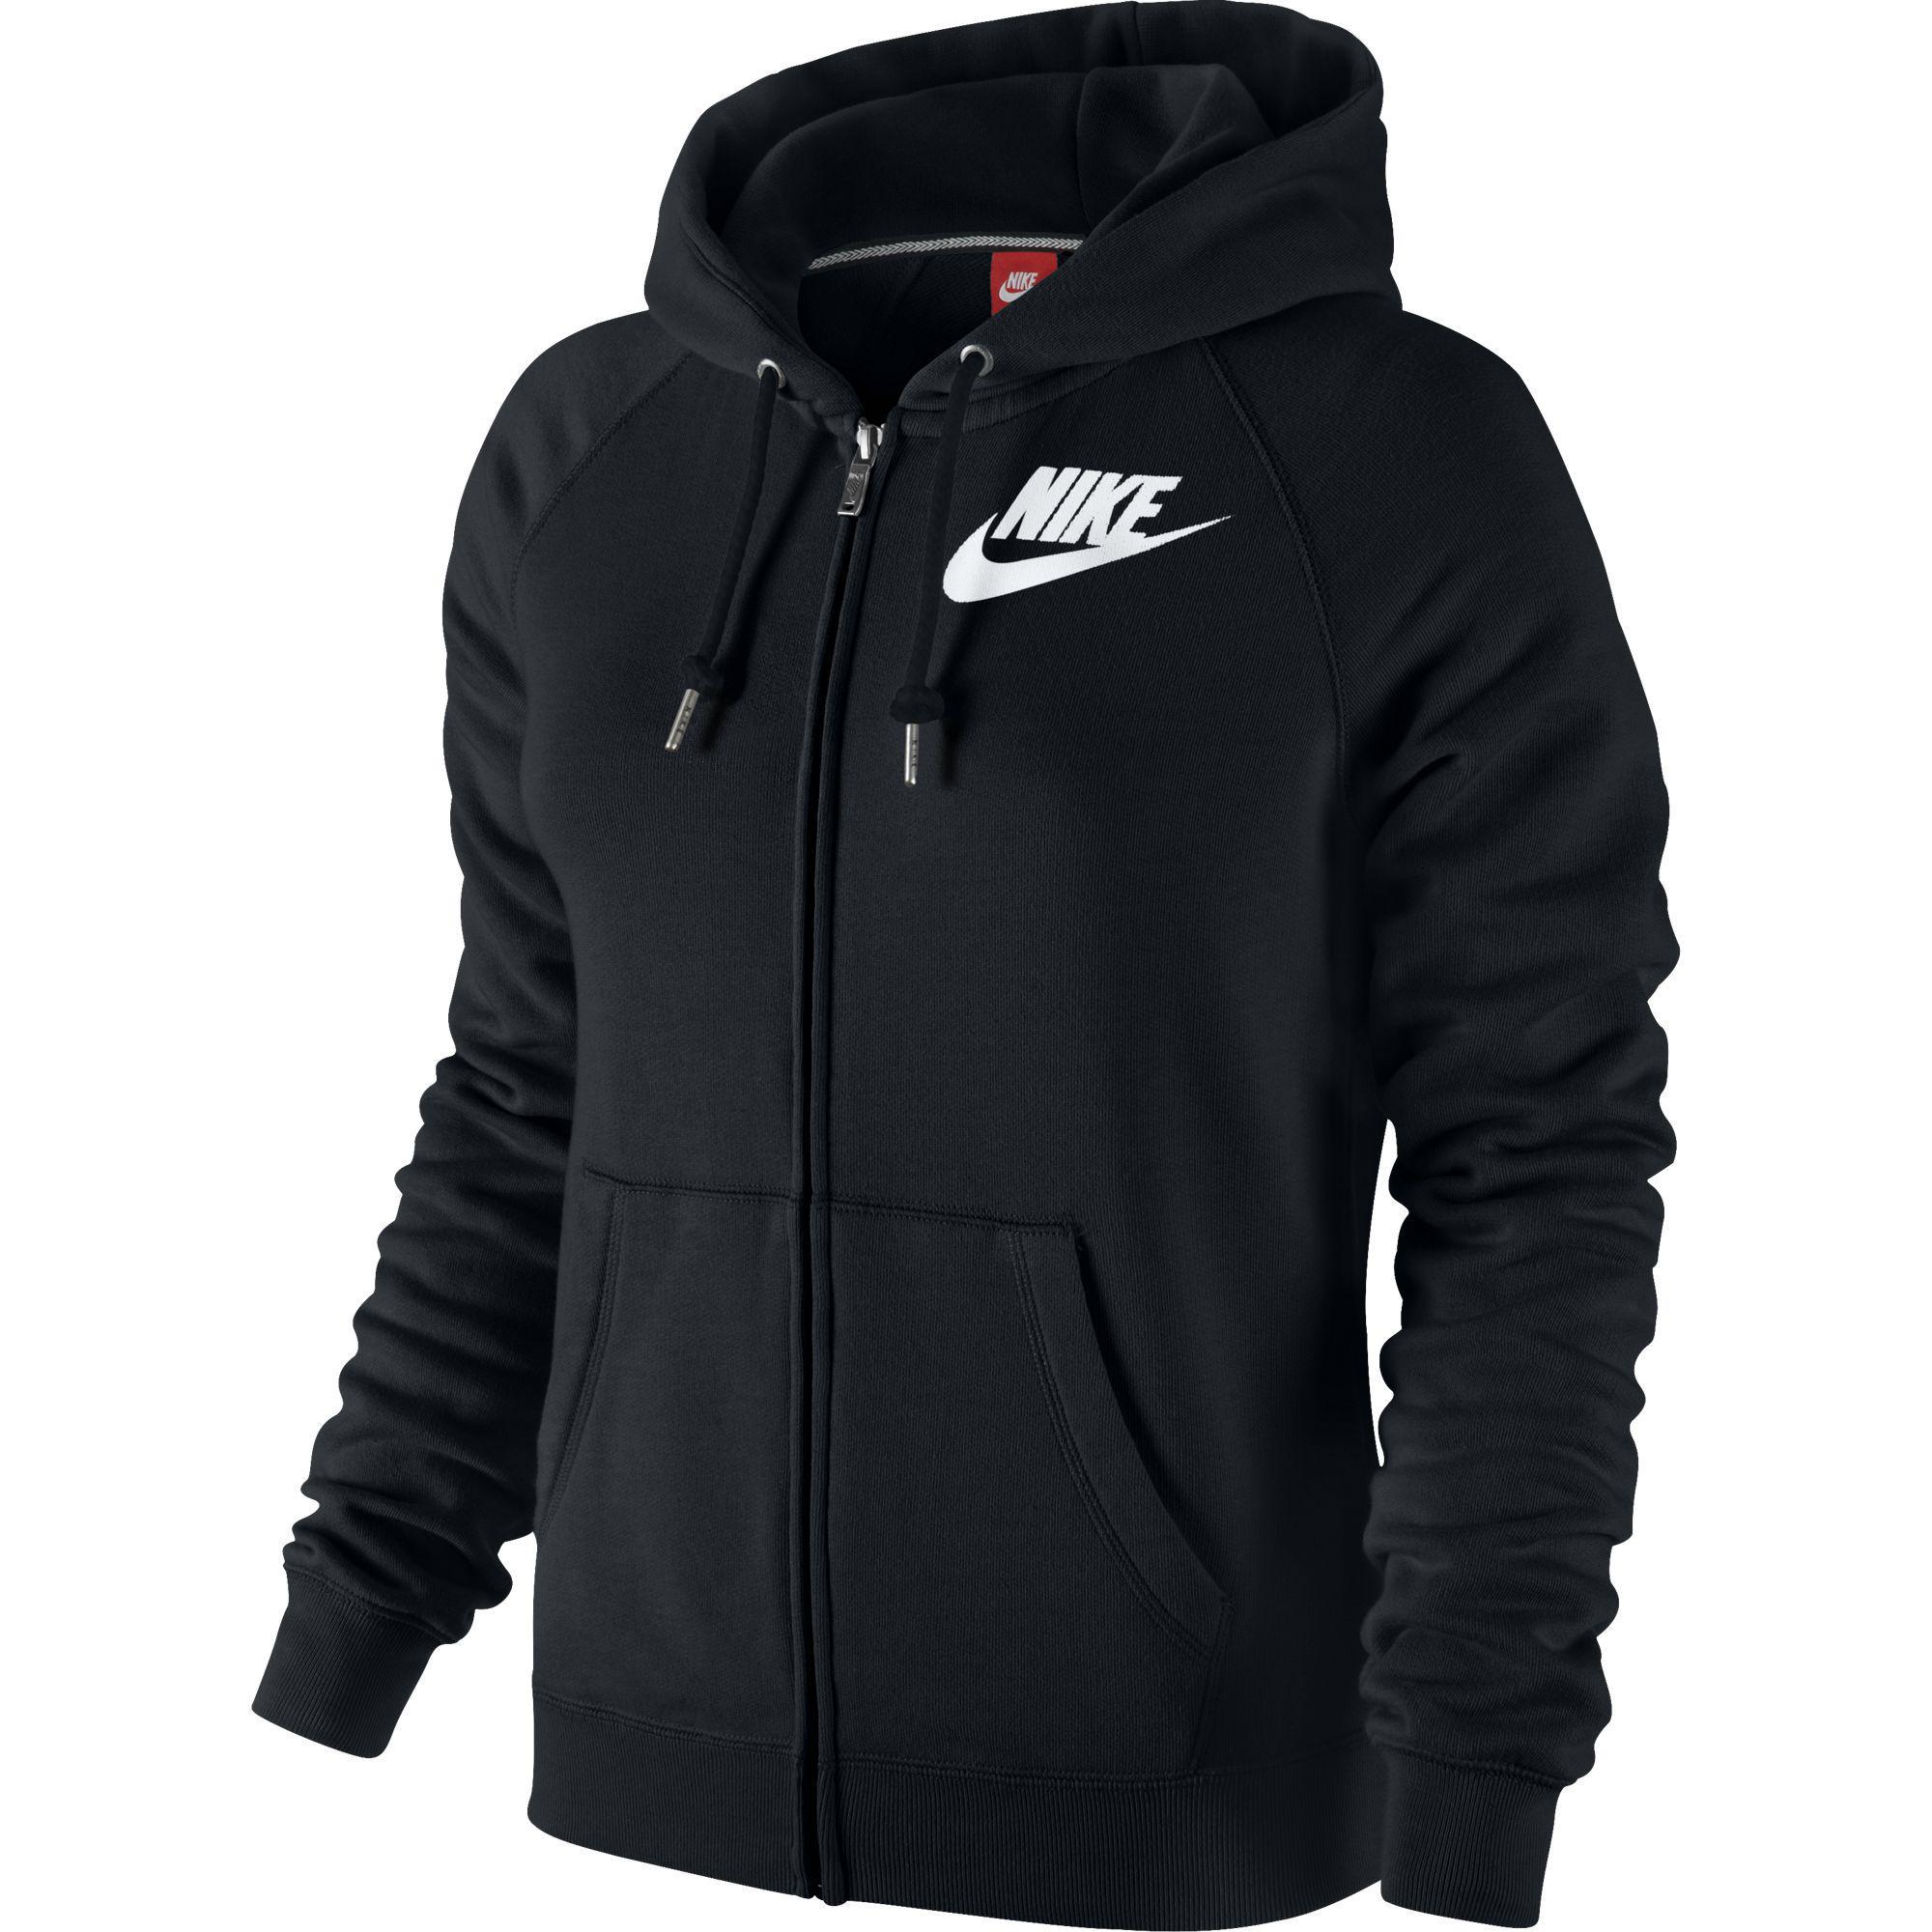 Wear wedding nike sweatshirt womens zip up jacket pound cheap, Little black dress for christmas party, cocktail dresses for young ladies. 